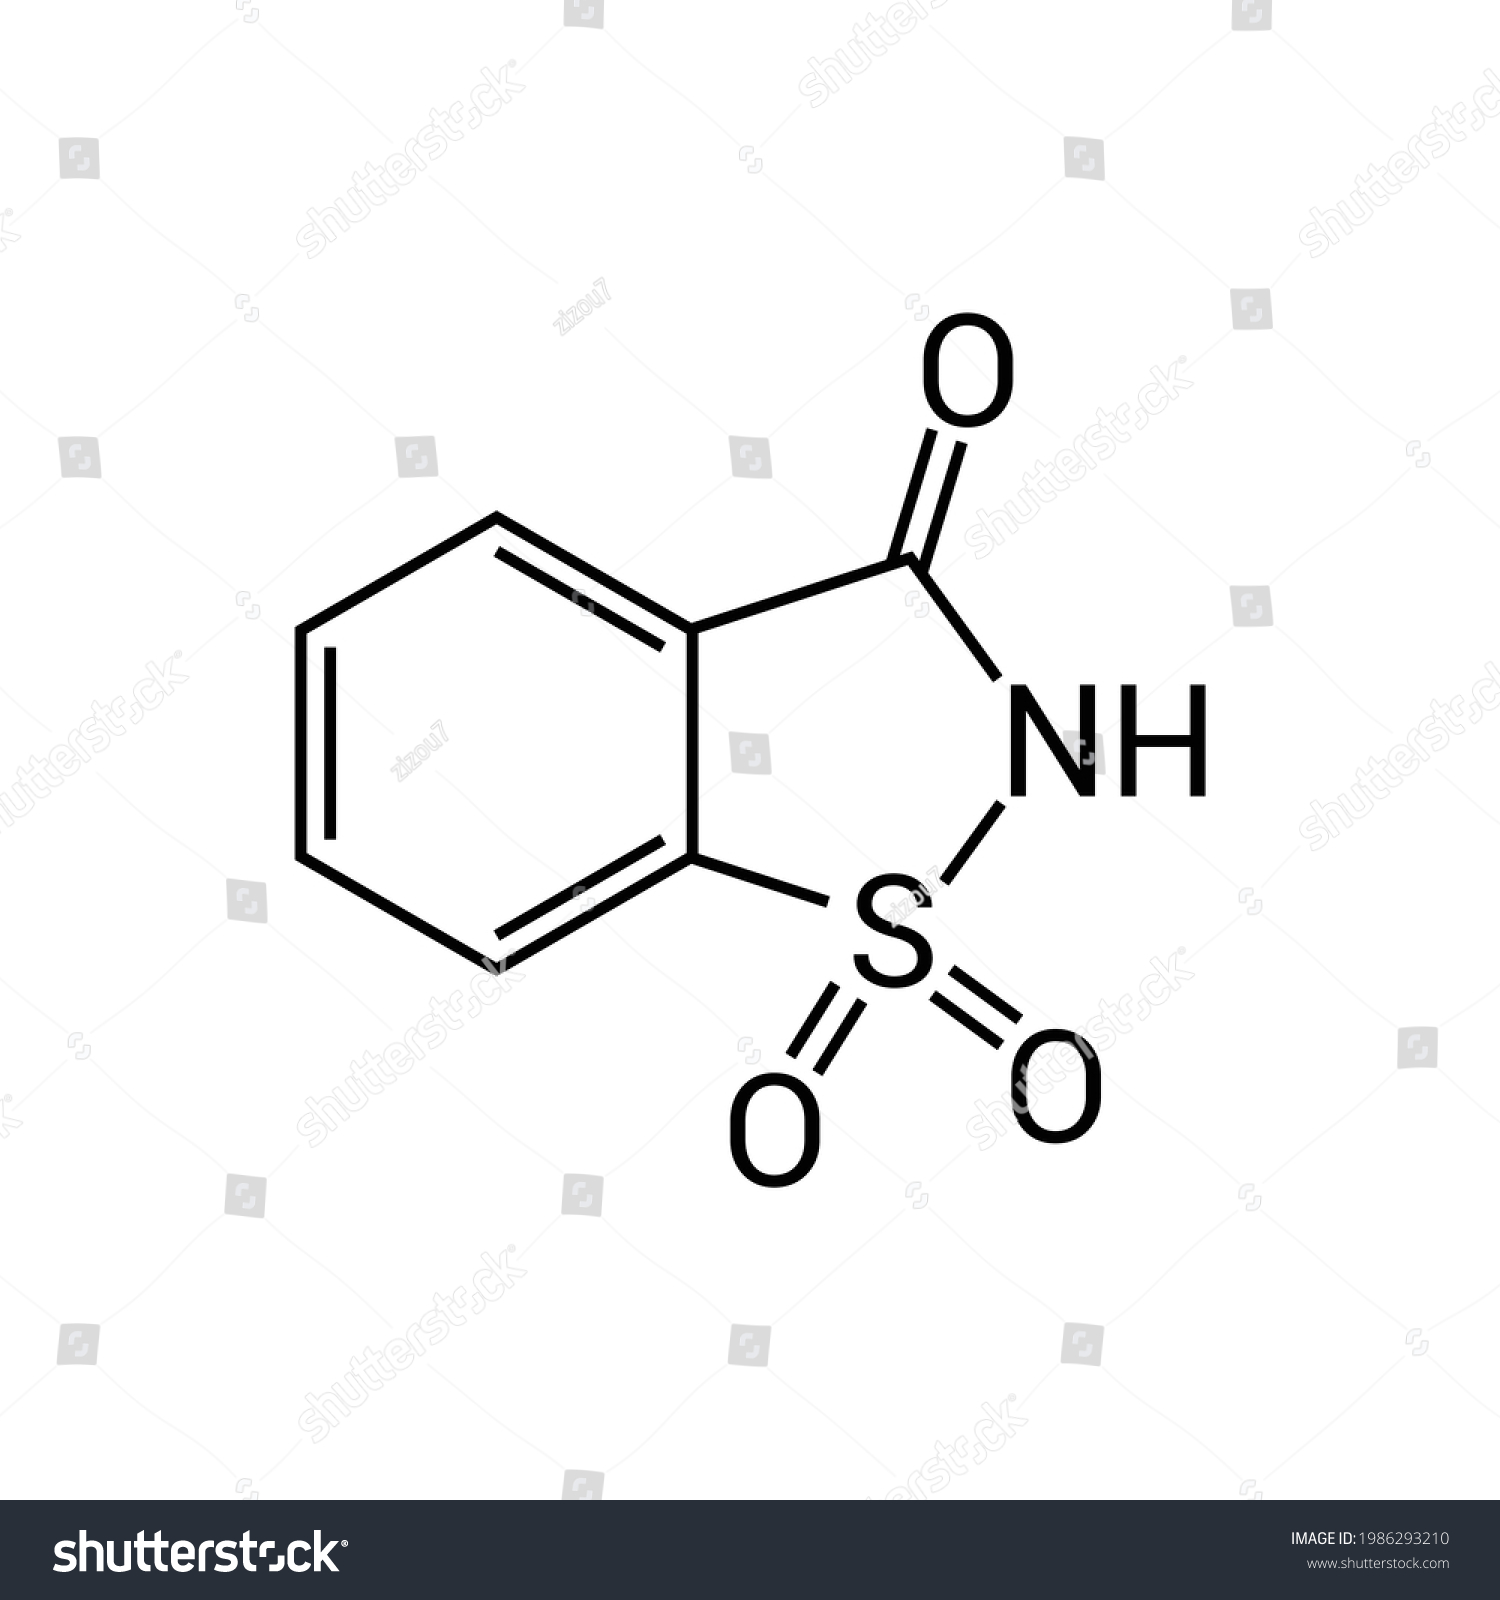 SVG of chemical structure of saccharin (C7H5NO3S) svg